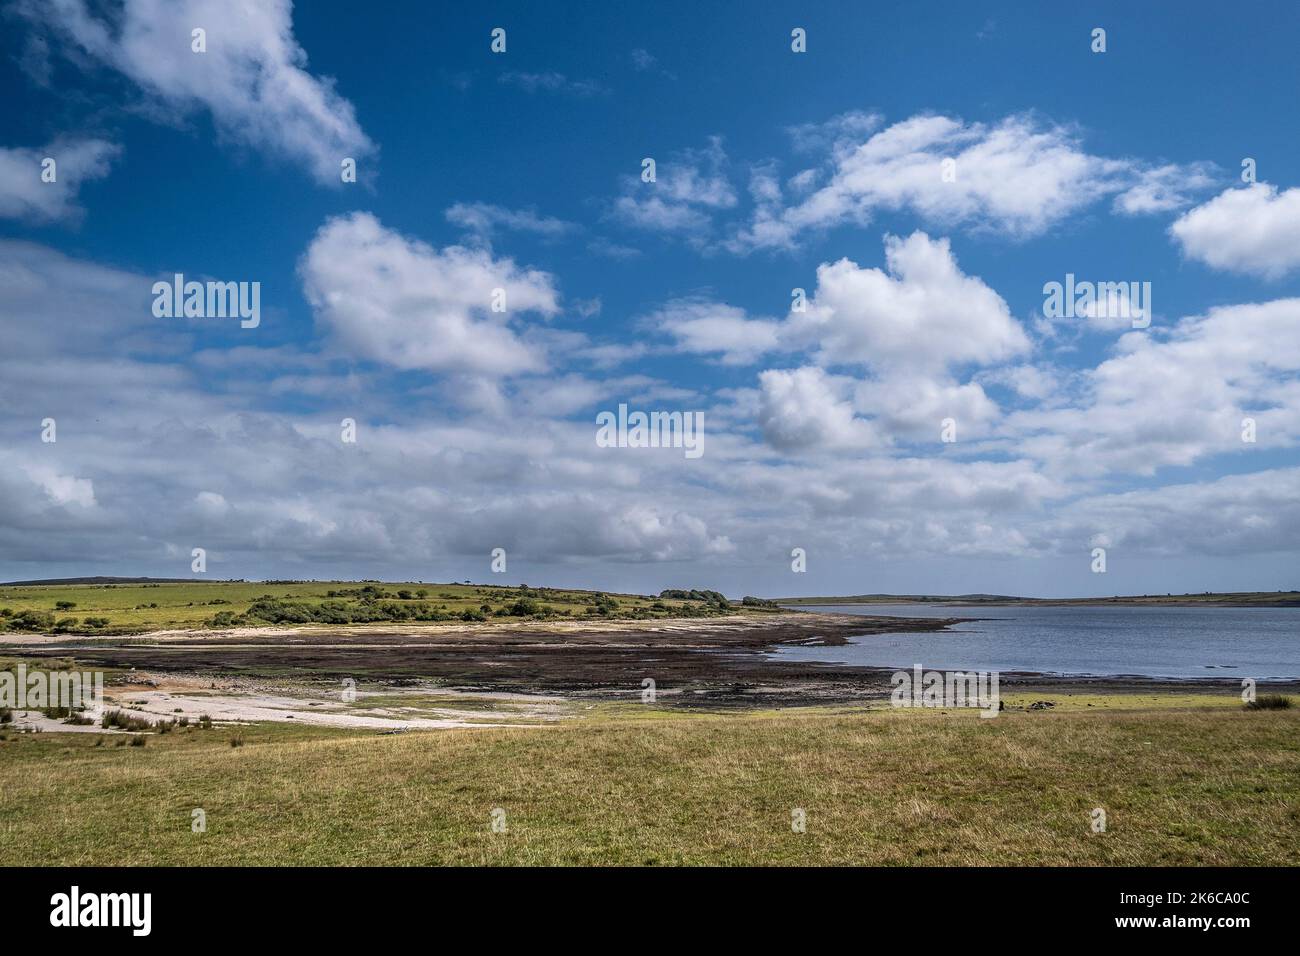 The receding shoreline caused by severe drought conditions at Colliford Lake Reservoir on Bodmin Moor in Cornwall in the UK. Stock Photo